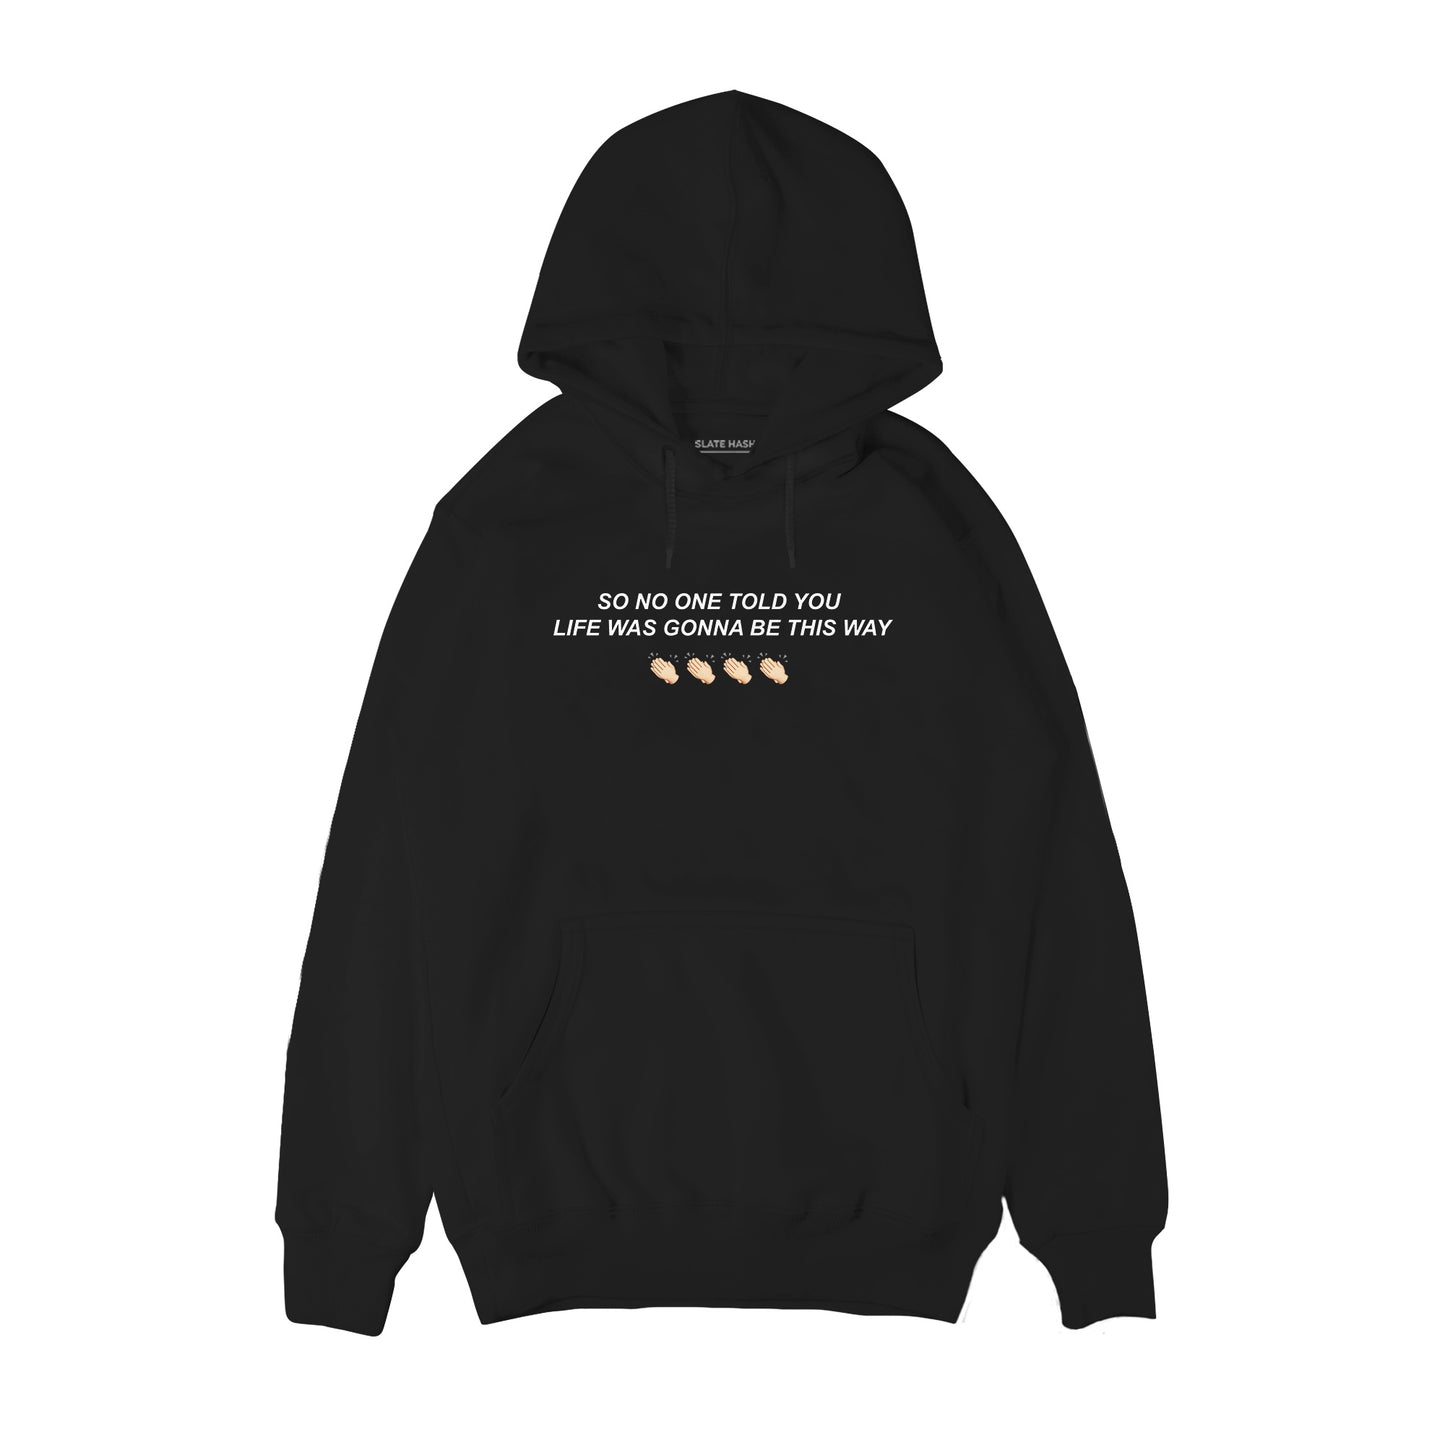 So no one told you life was gonna be this way Hoodie